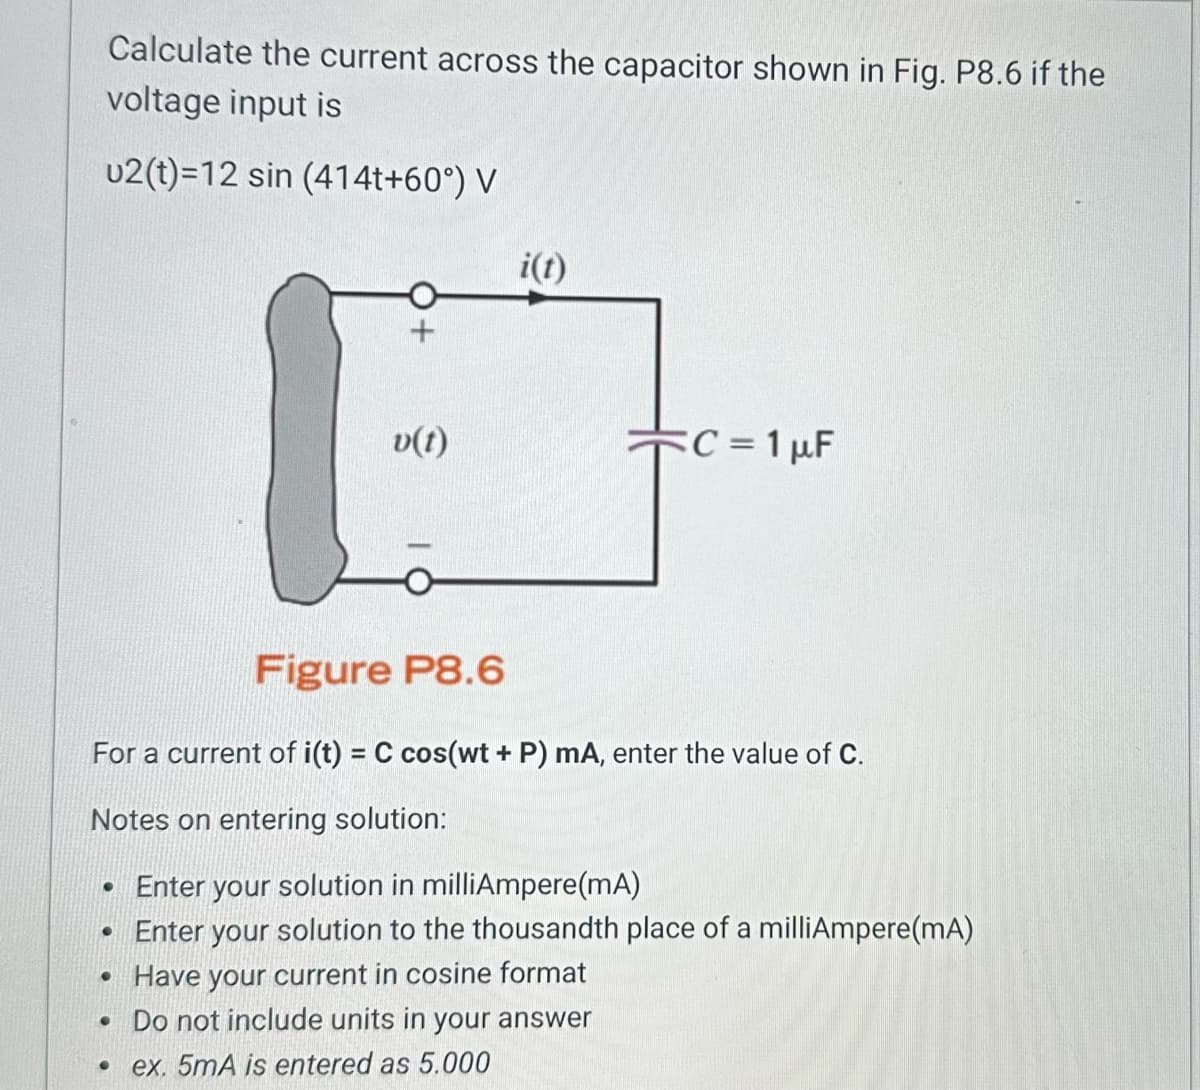 Calculate the current across the capacitor shown in Fig. P8.6 if the
voltage input is
u2(t)=12 sin (414t+60°) V
[
+
●
v(t)
i(t)
C = 1 µF
Figure P8.6
For a current of i(t) = C cos(wt + P) mA, enter the value of C.
Notes on entering solution:
• Enter your solution in milliAmpere(mA)
• Enter your solution to the thousandth place of a milliAmpere(mA)
Have your current in cosine format
. Do not include units in your answer
ex. 5mA is entered as 5.000